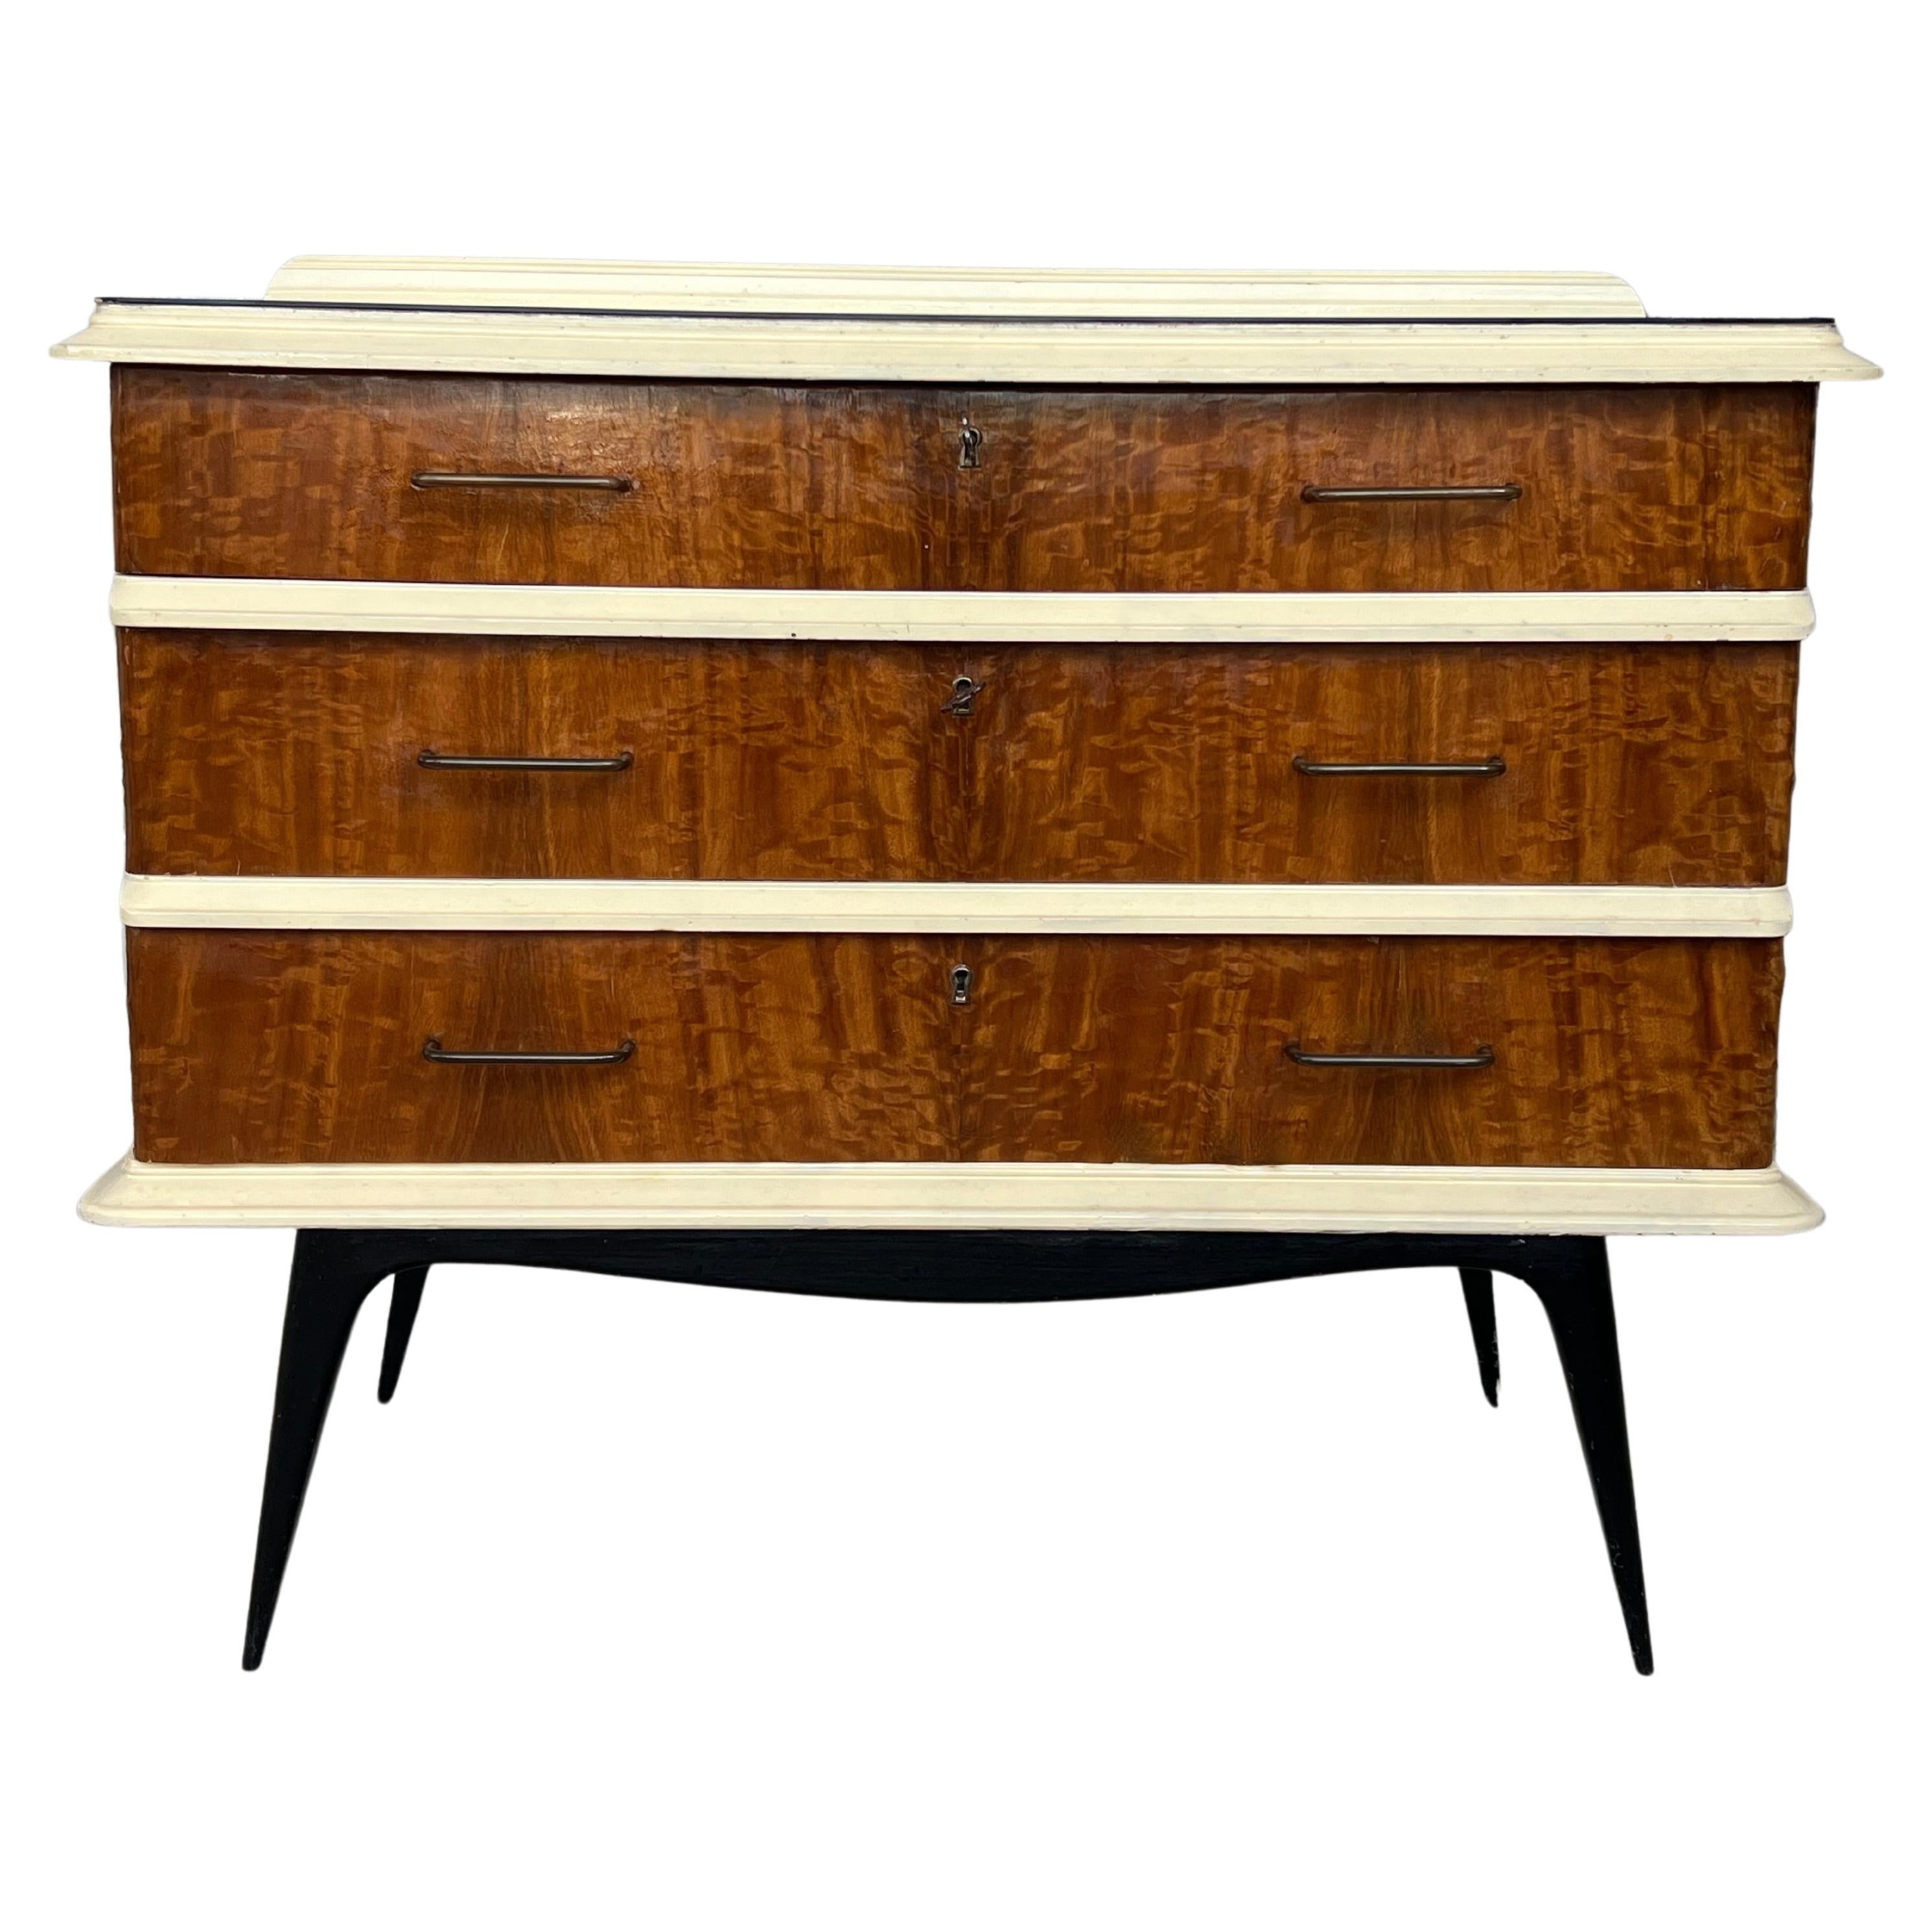 Mid Century Modern Chest of Drawers or Commode in Wood/Cream with Black Legs For Sale